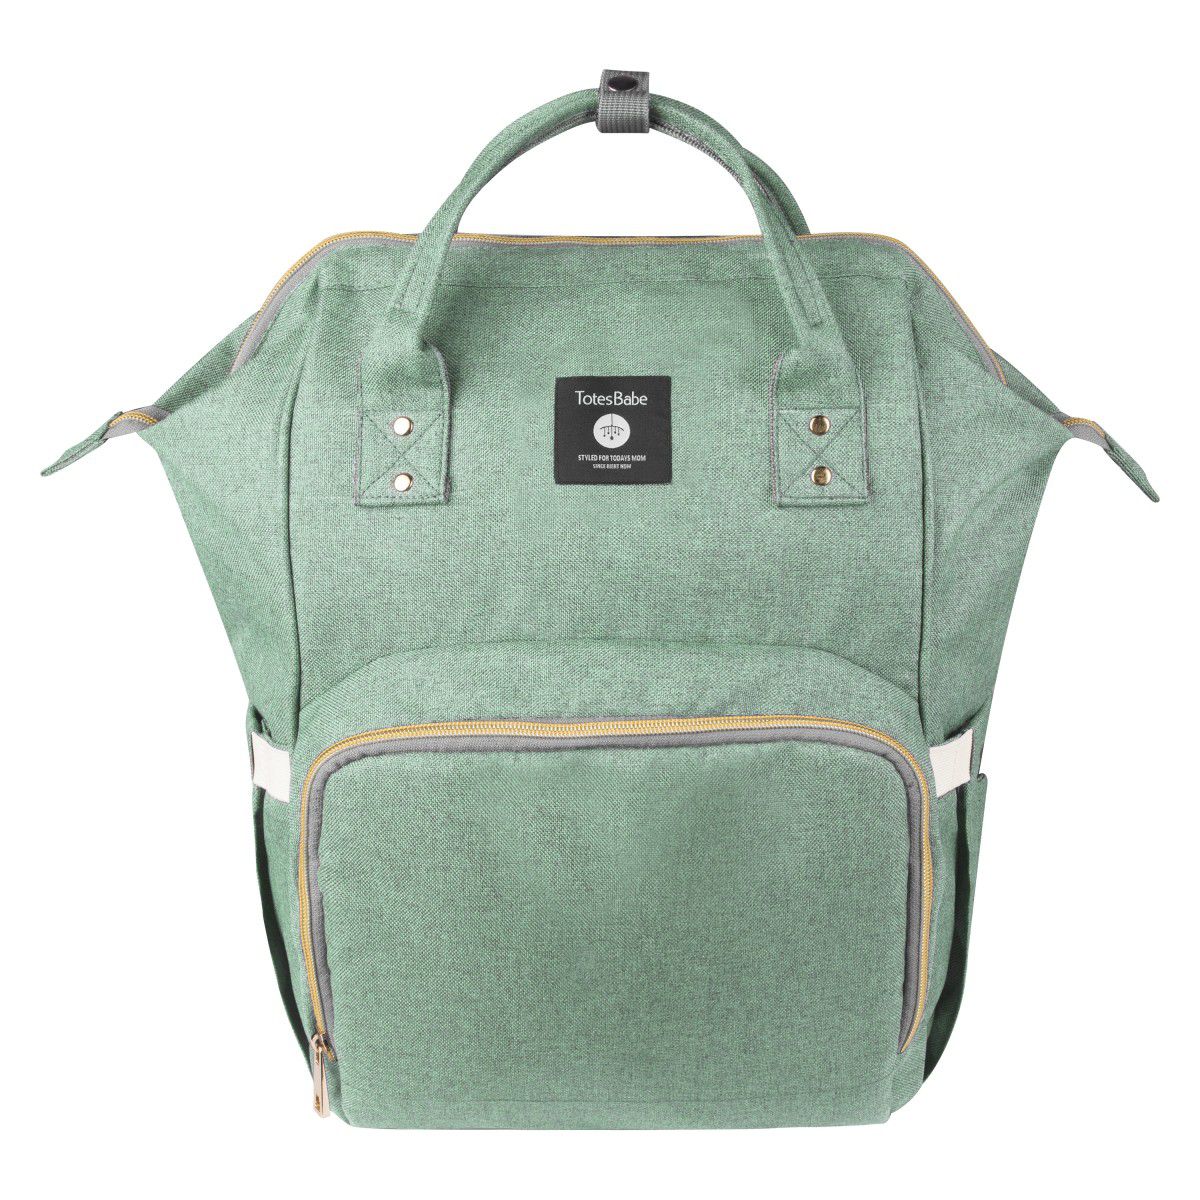 Totes Babe Alma 18L Diaper Backpack - Mint